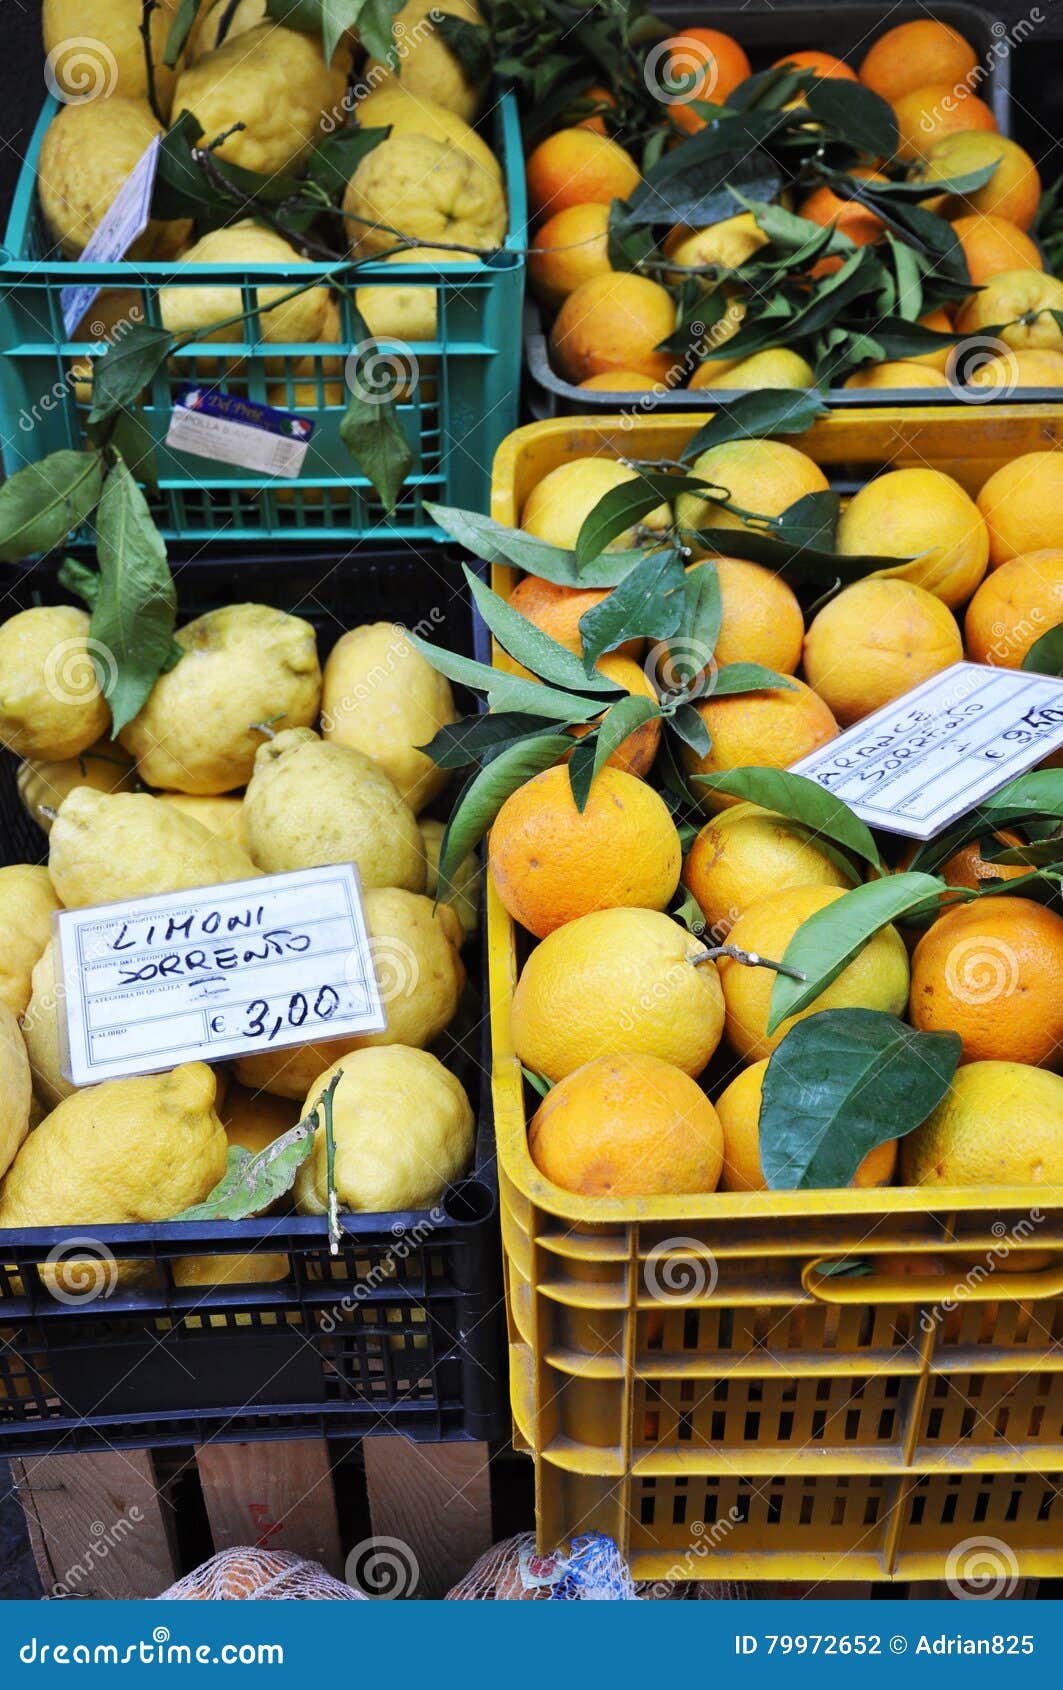 fresh lemons, oranges and other fruits and vegetables on a street market in sorrento, amalfi coast in italy